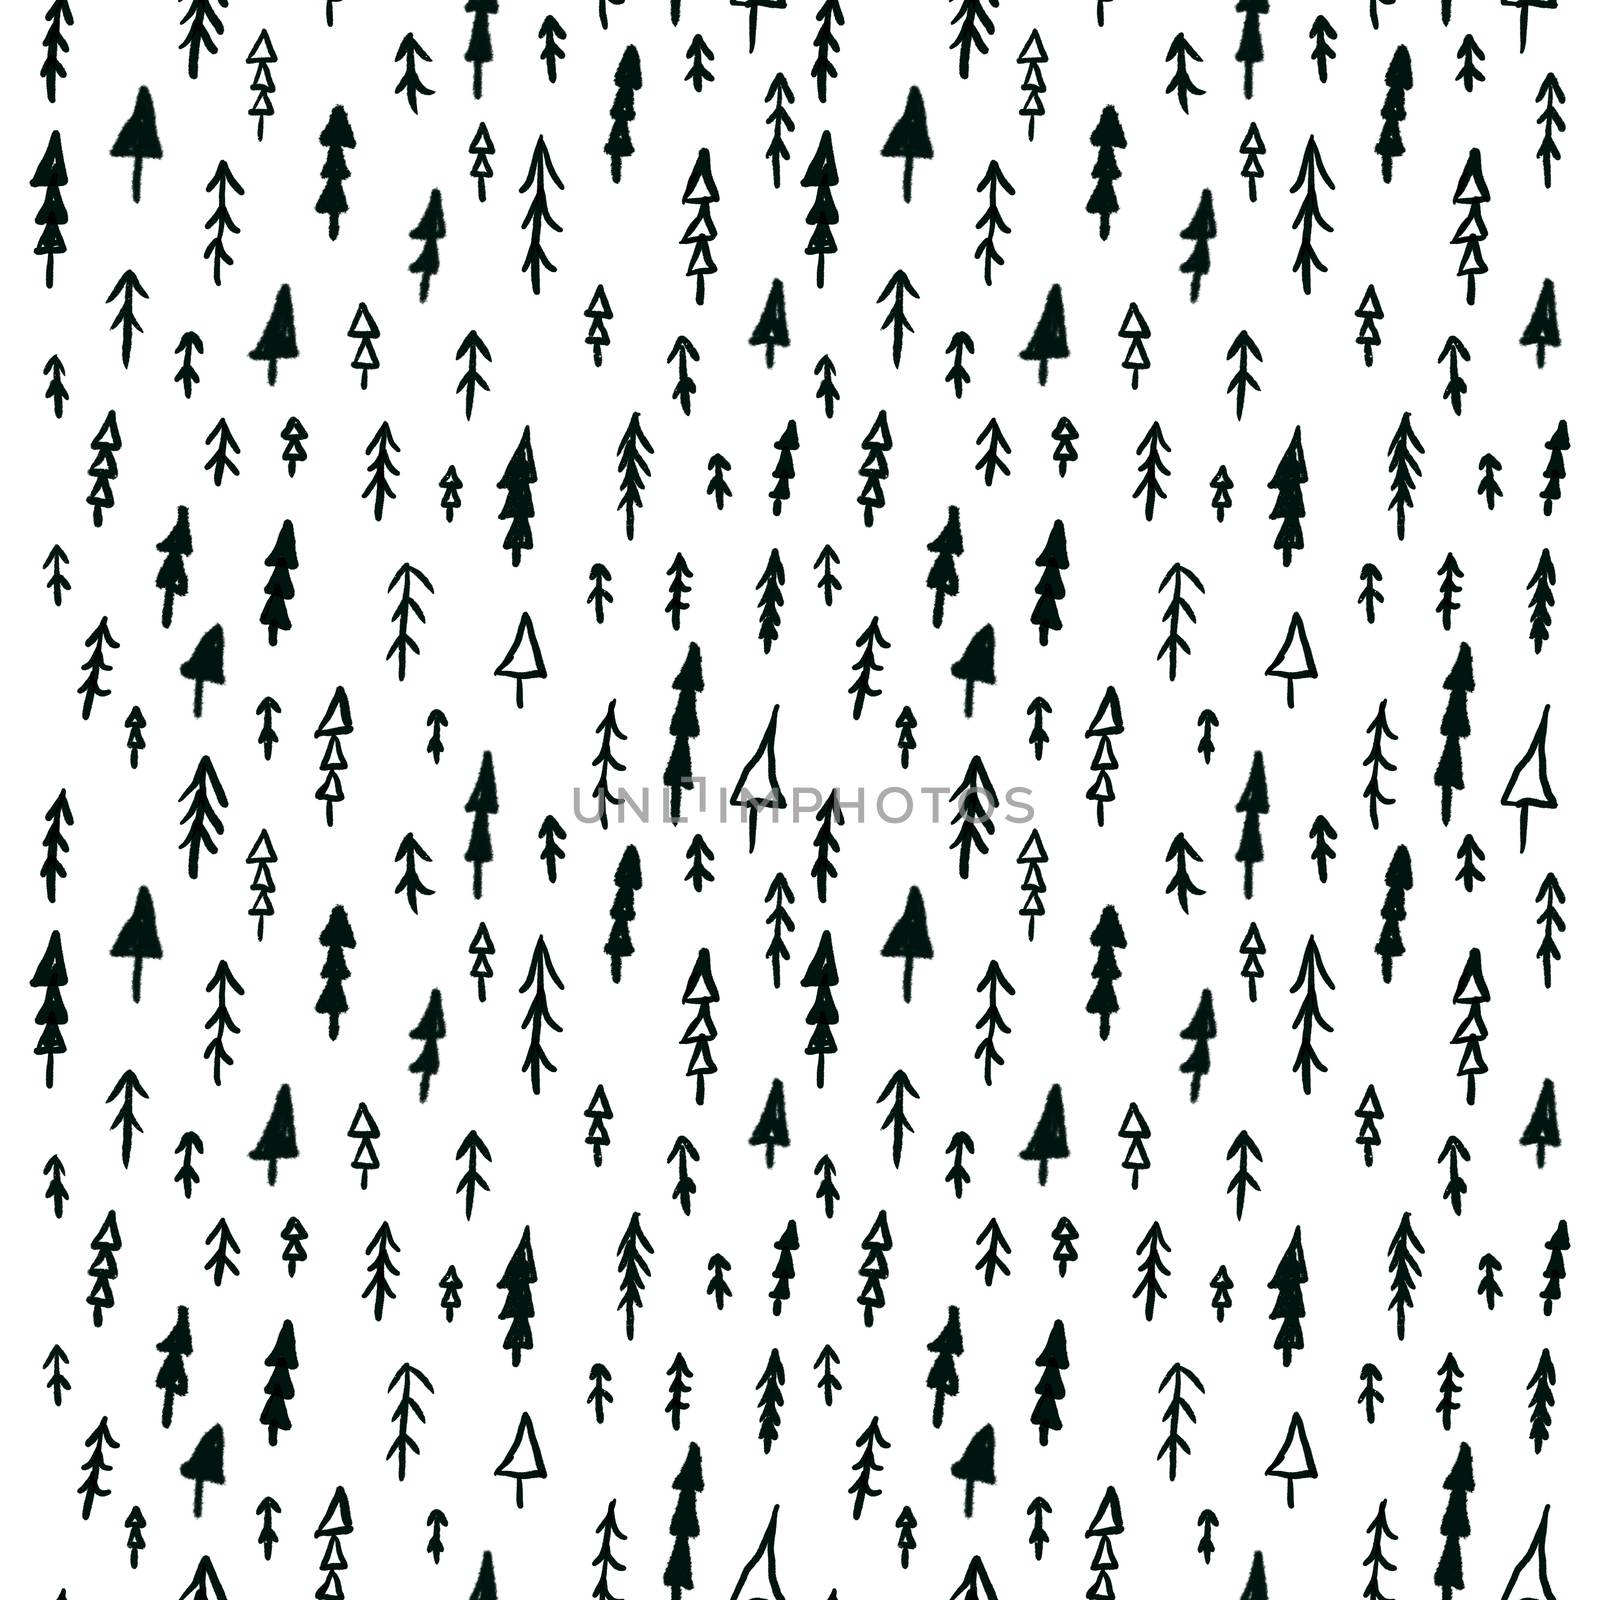 Nordic Christmas tree seamless pattern on white background. Festive endless background. Doodle ink repeat pattern design for for scrapbooking, cards, wrapping paper, wallpaper.